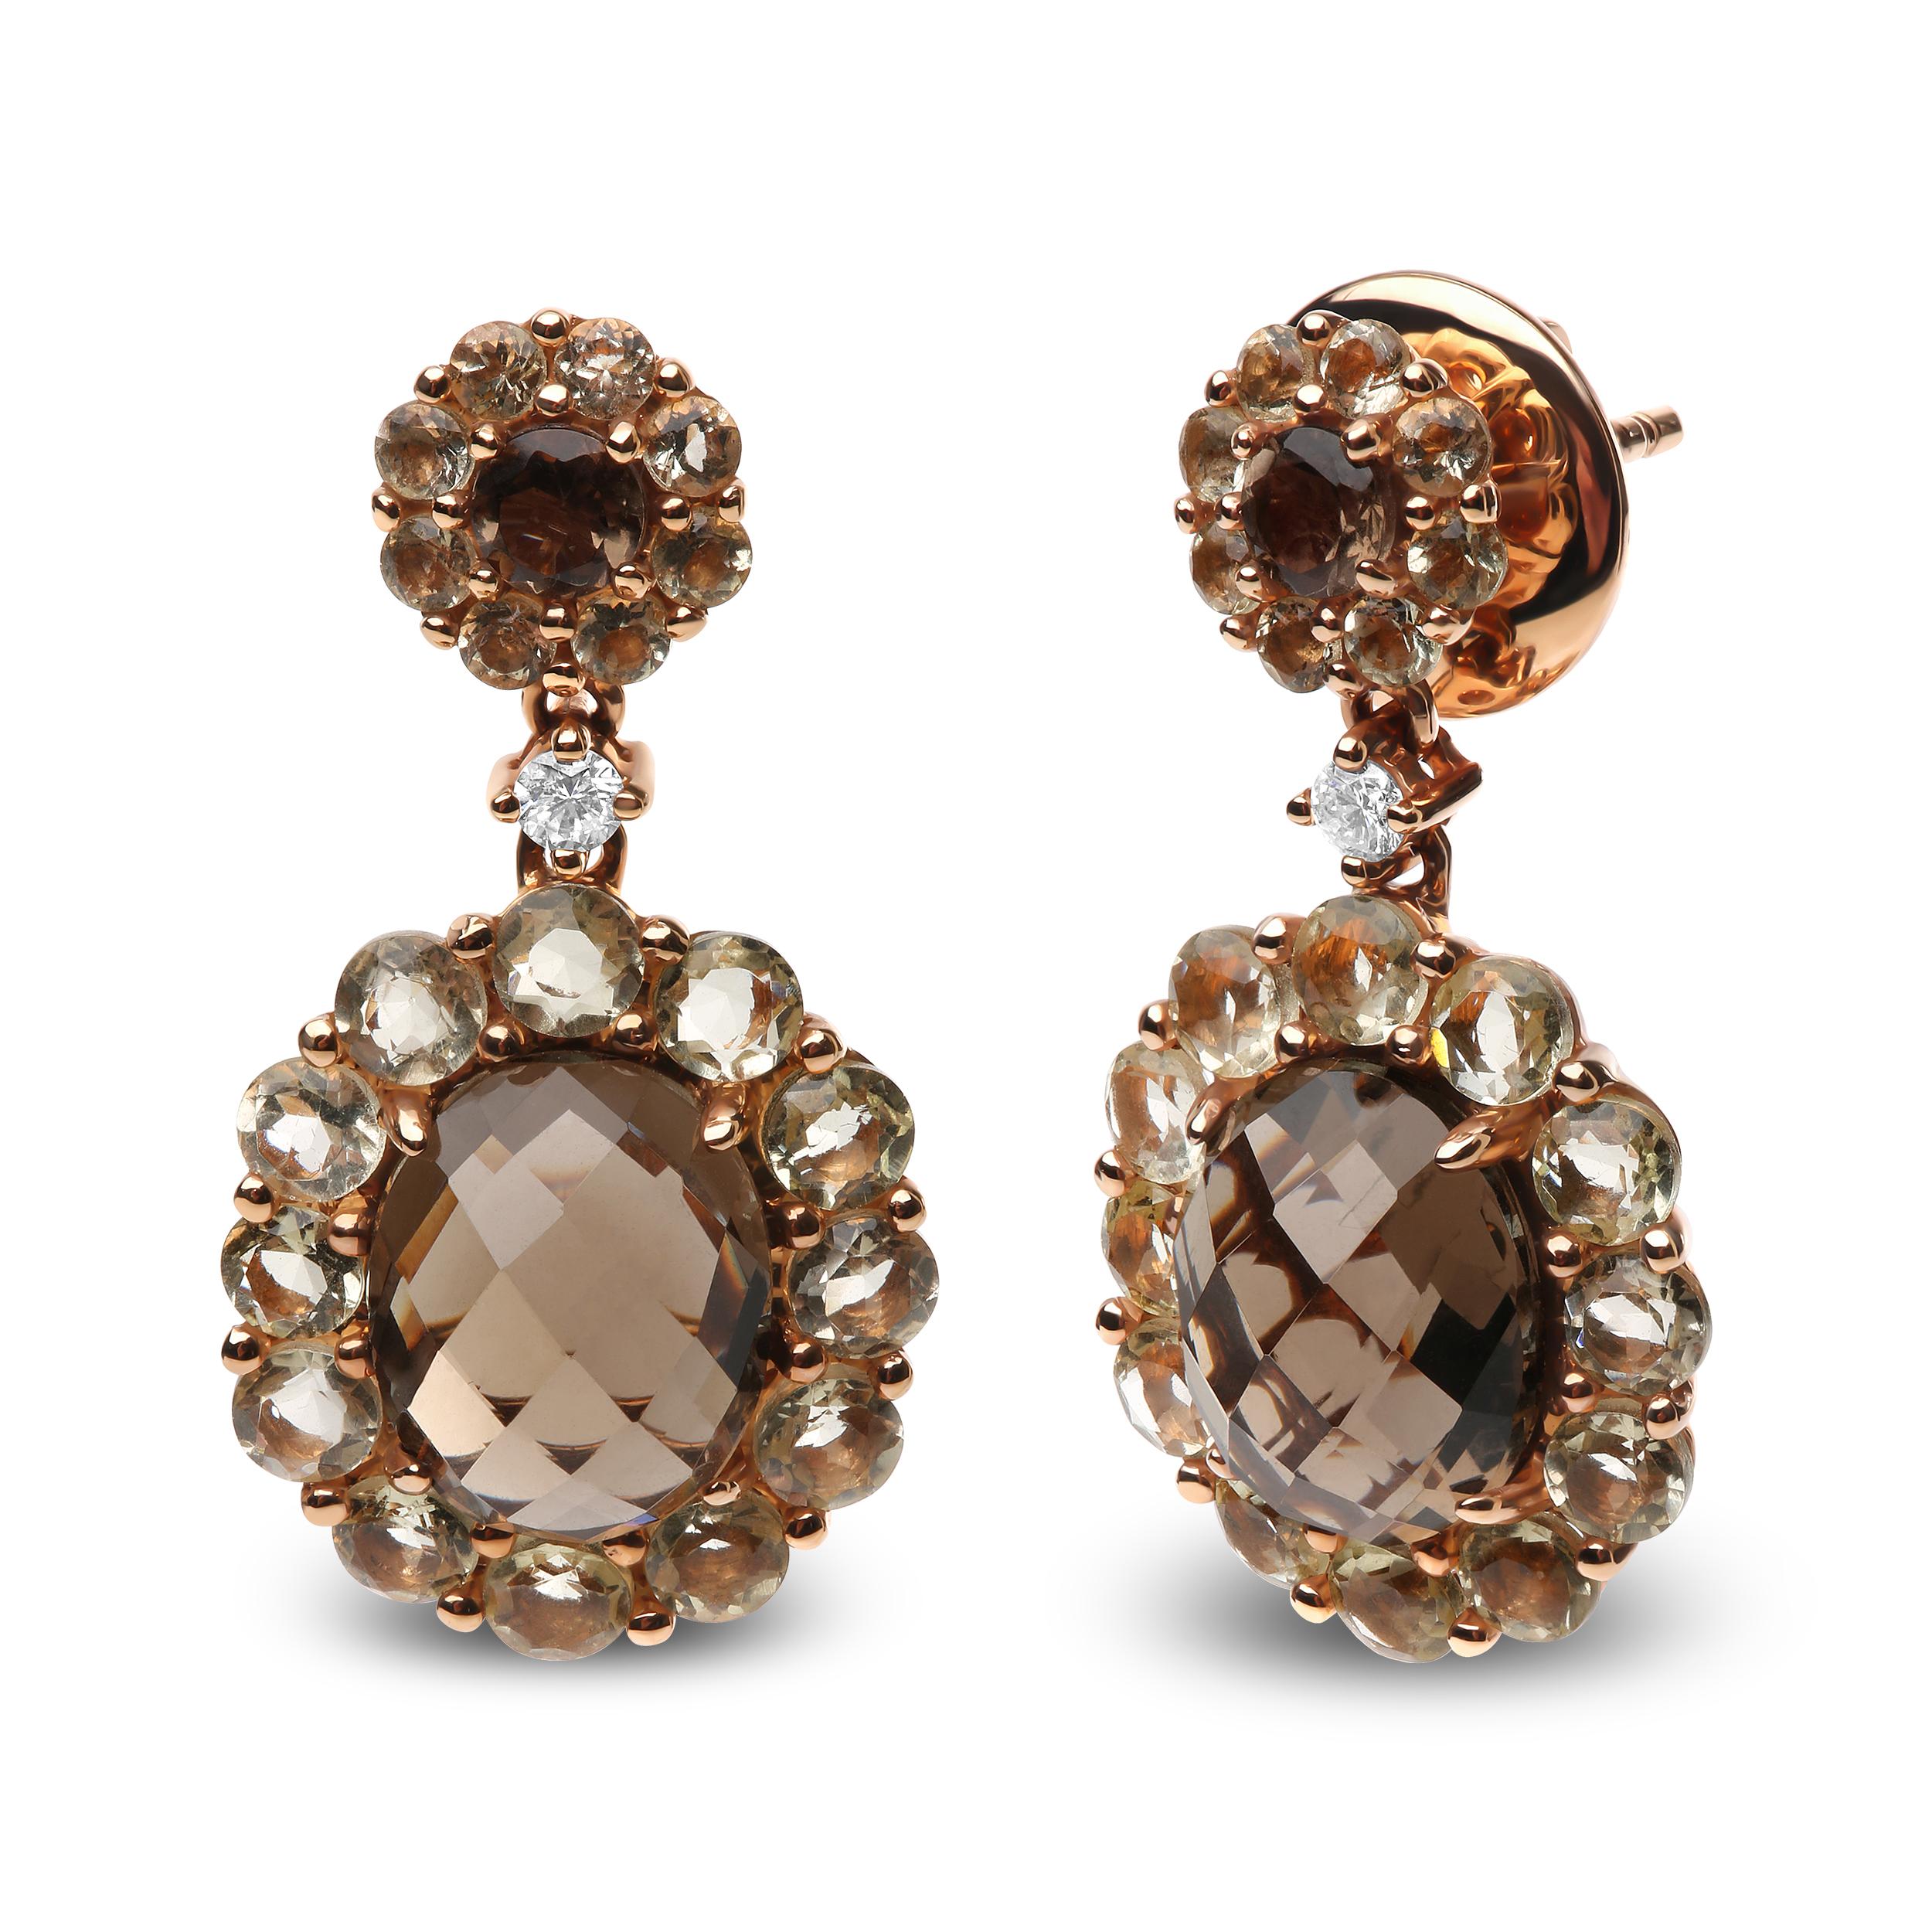 Brilliant colors and stunning sparkle encompass this gorgeous pair of 18k rose gold dangle drop earrings. The upper dangle is set with a central 3mm round heat-treated smoky quartz in a 4-prong setting and is haloed by 2mm round heat-treated lemon